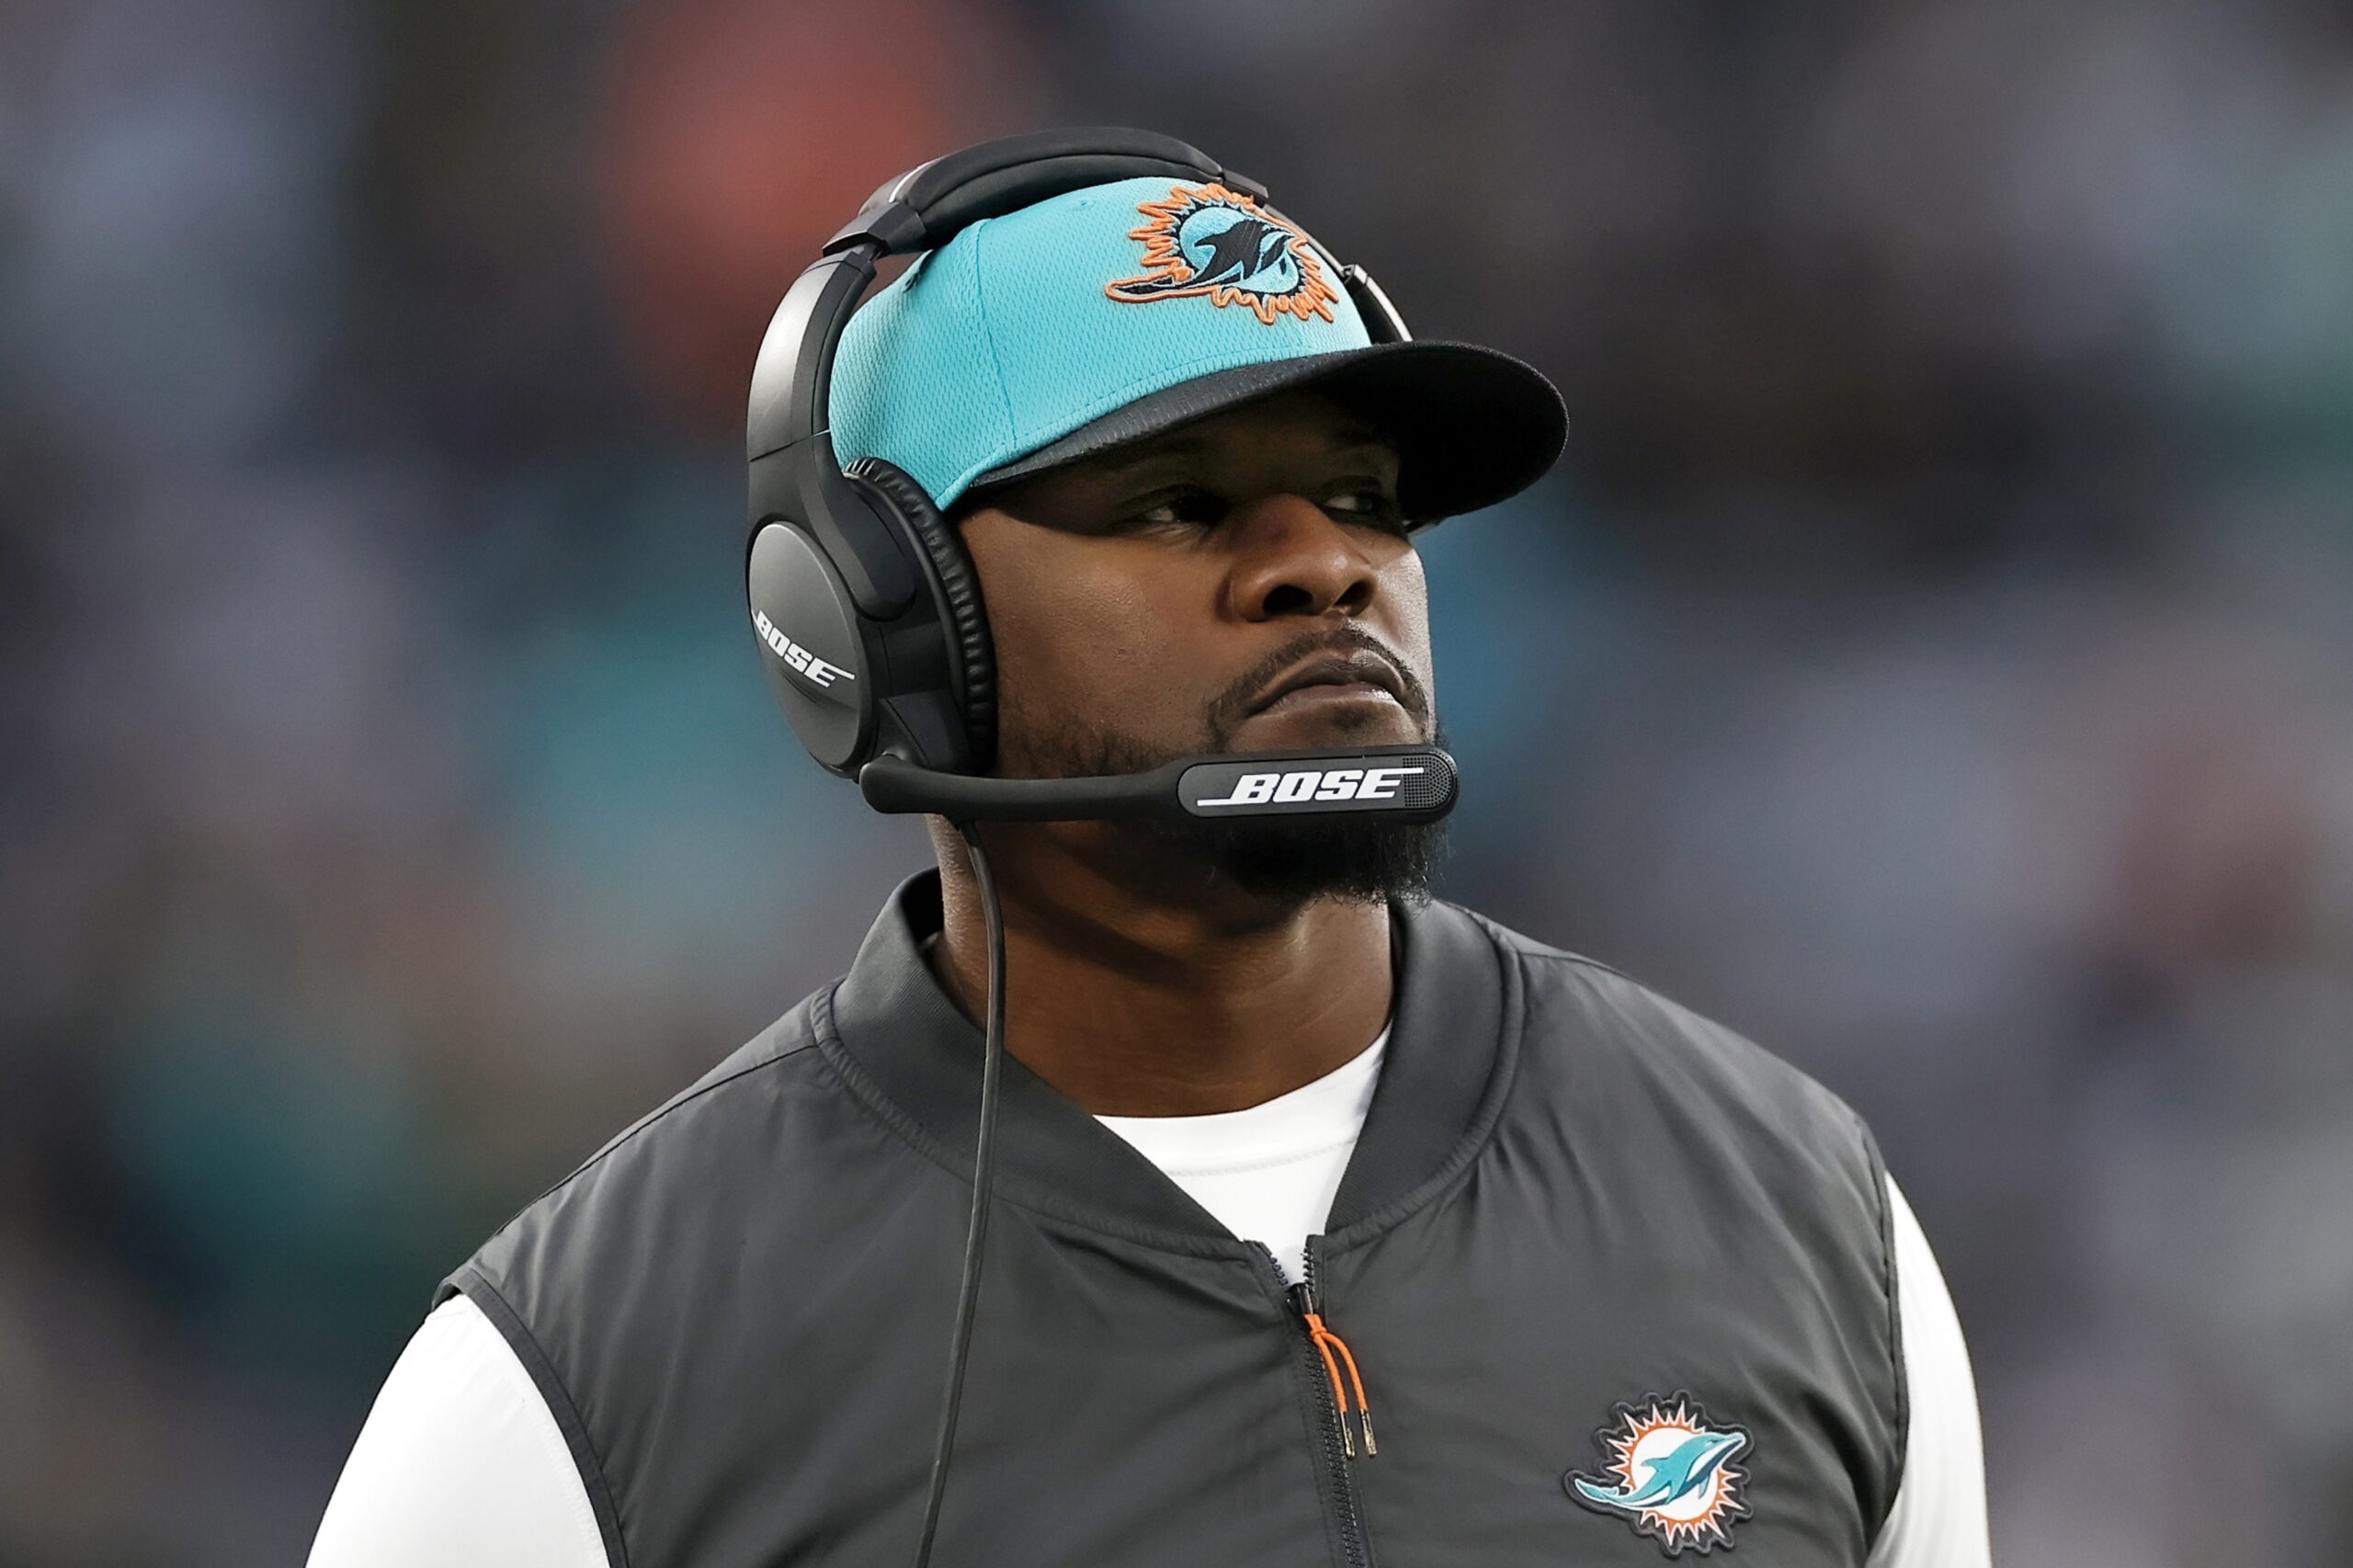 FILE - Miami Dolphins head coach Brian Flores stands on the sidelines during an NFL football game against the New York Jets on Nov. 21, 2021, in East Rutherford, N.J. Flores' lawyer told a judge Monday that arbitration is the wrong way to resolve the lawsuit, alleging racist hiring practices within the league, in part because NFL Commissioner Roger Goodell would be the arbitrator and that would be “unconscionable.” (AP Photo/Adam Hunger, File)